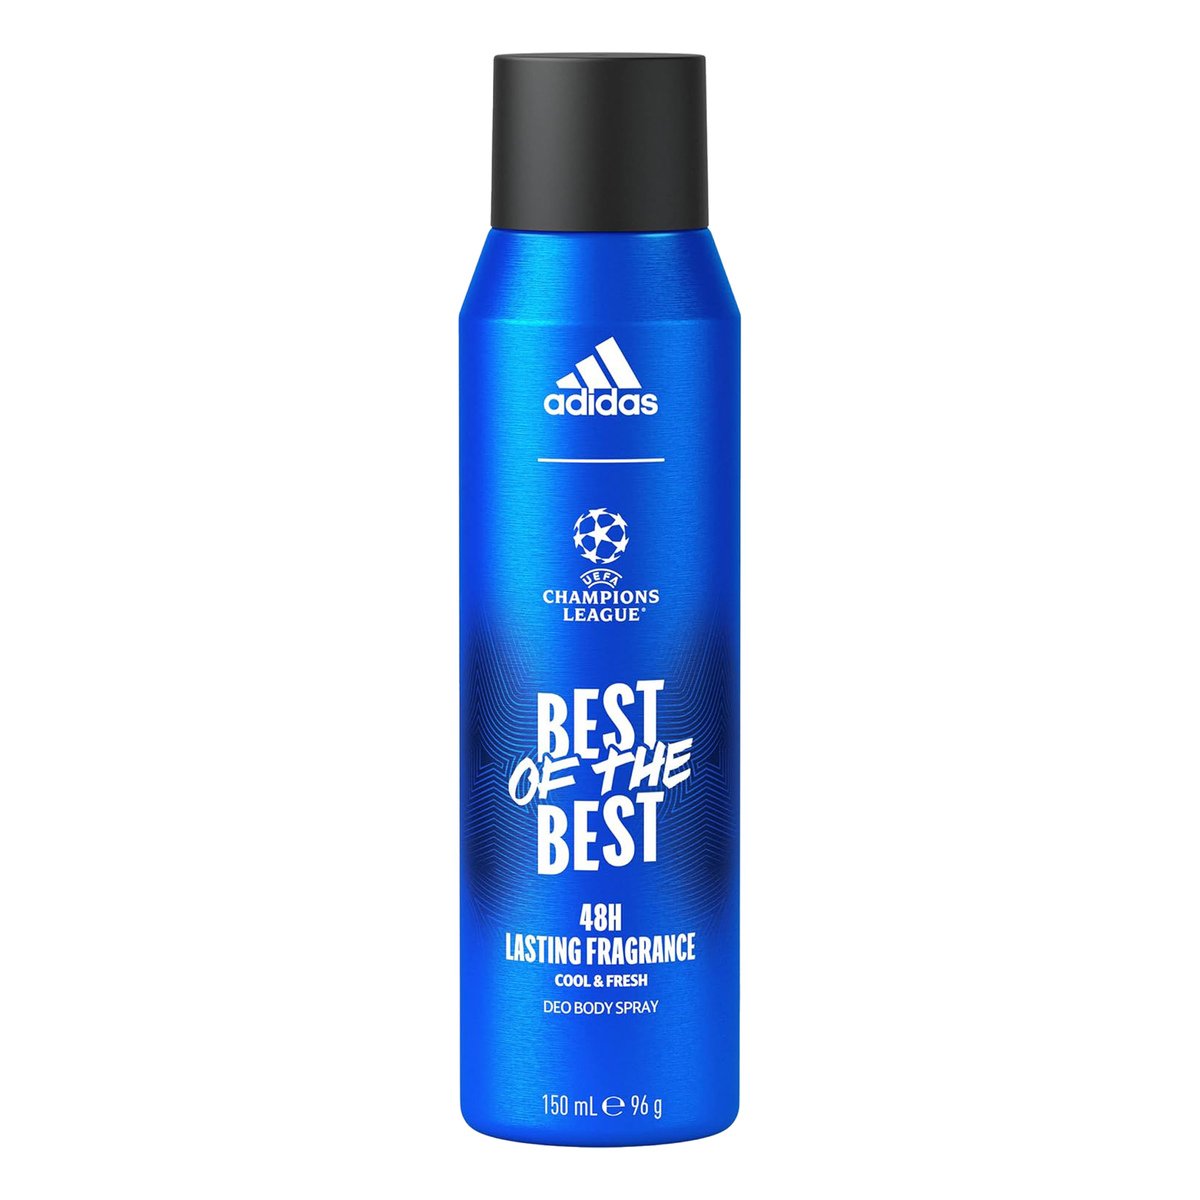 Adidas EDT Best Of The Best Champion League For Men 100 ml + Deo Body Spray 150 ml